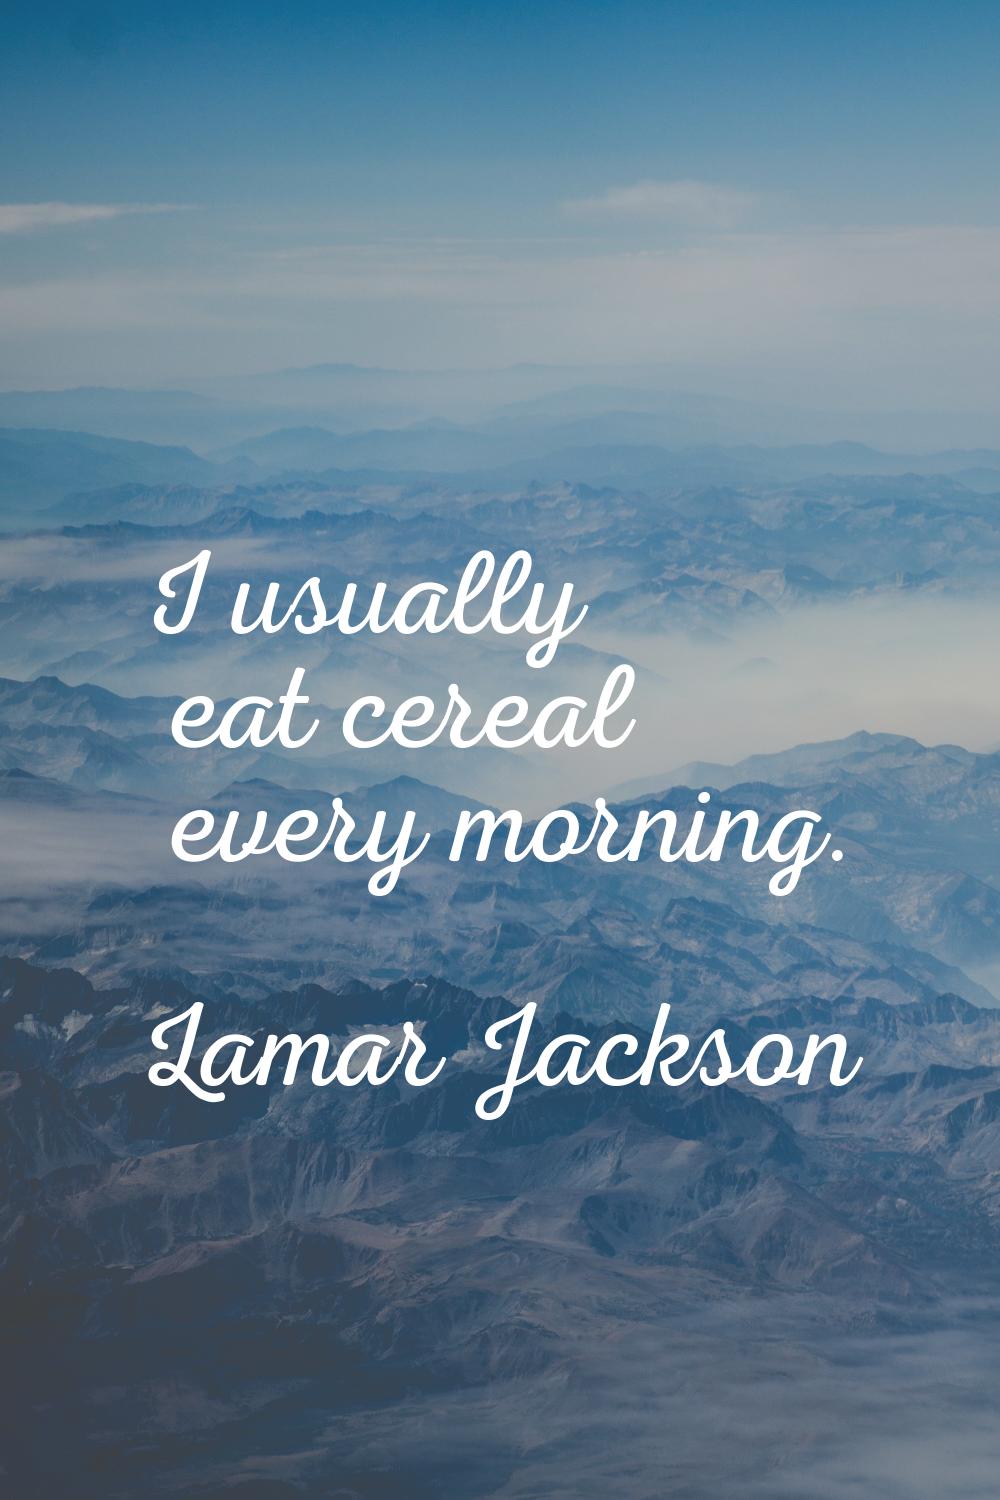 I usually eat cereal every morning.